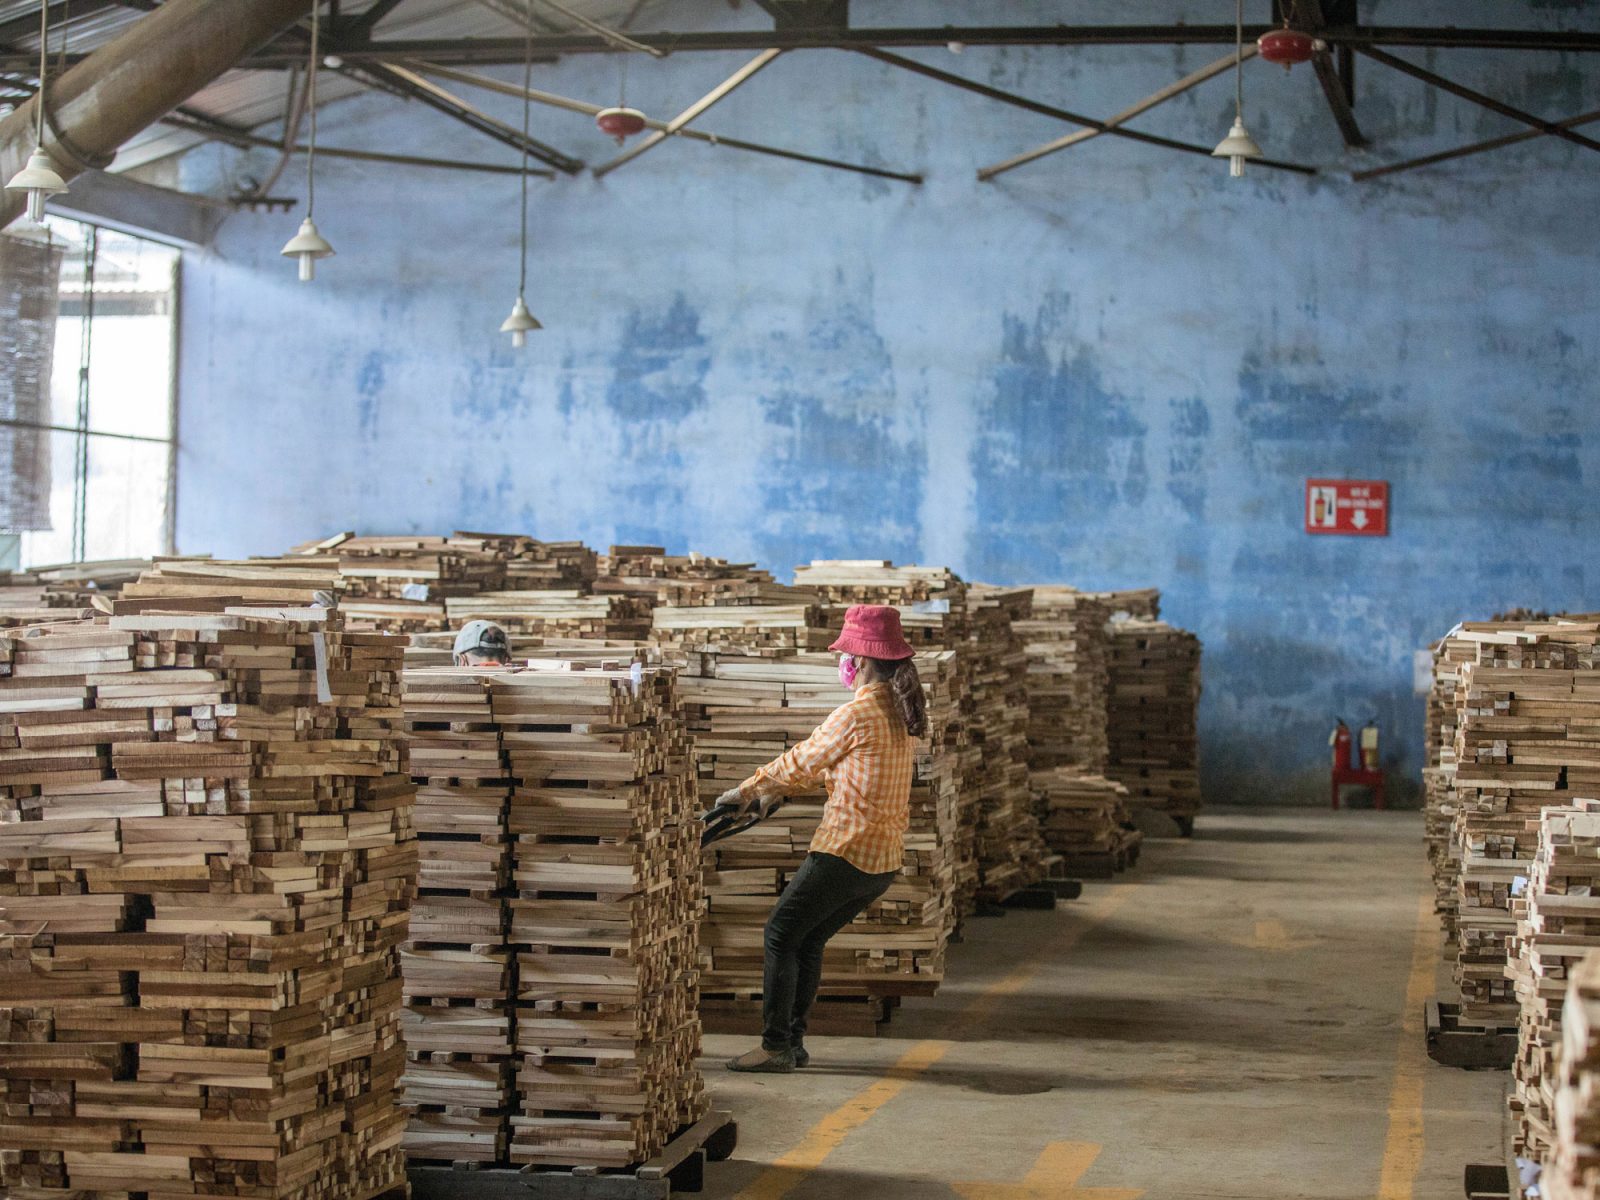 Stacks of acacia on pallets in factory, young Asian woman in red hat, checked shirt and face mask is moving one pallet.